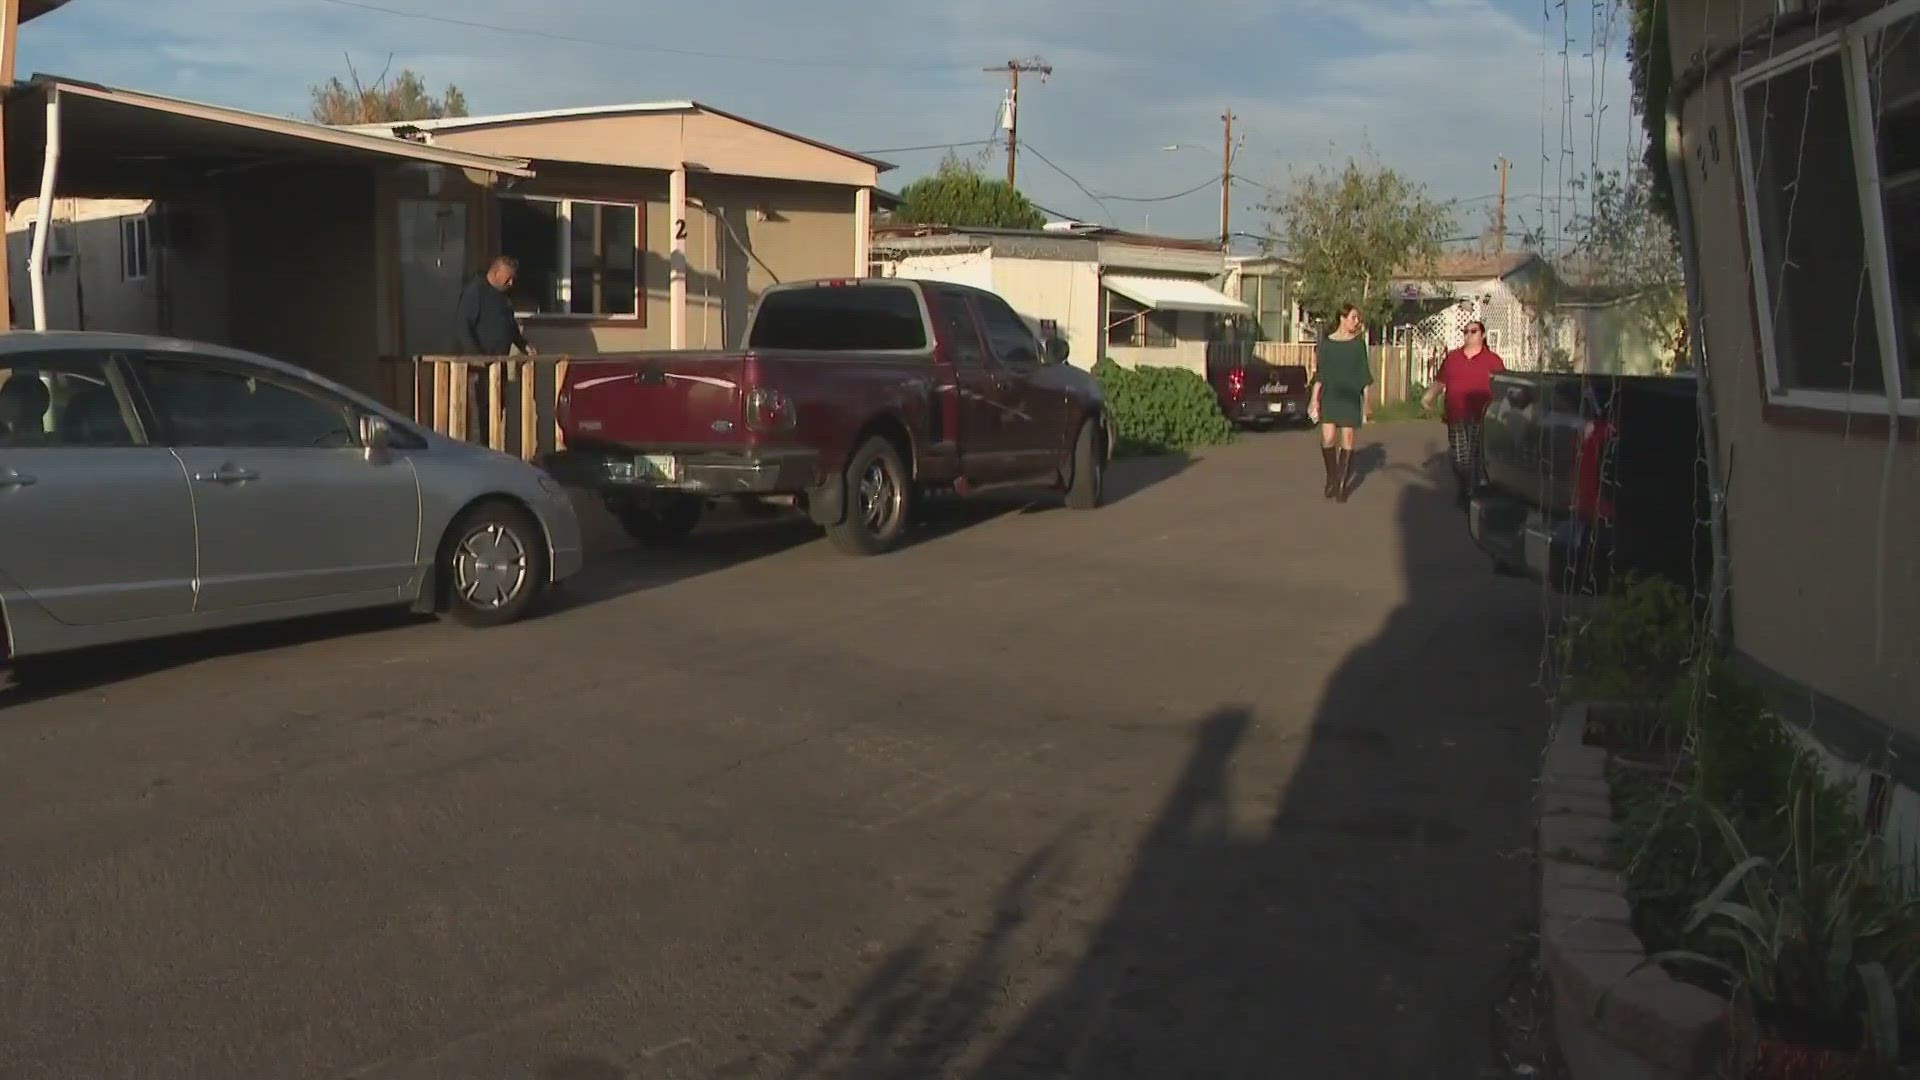 Three mobile home parks in Phoenix are closing and getting redeveloped and the residents who live there fear they are on the verge of homelessness.